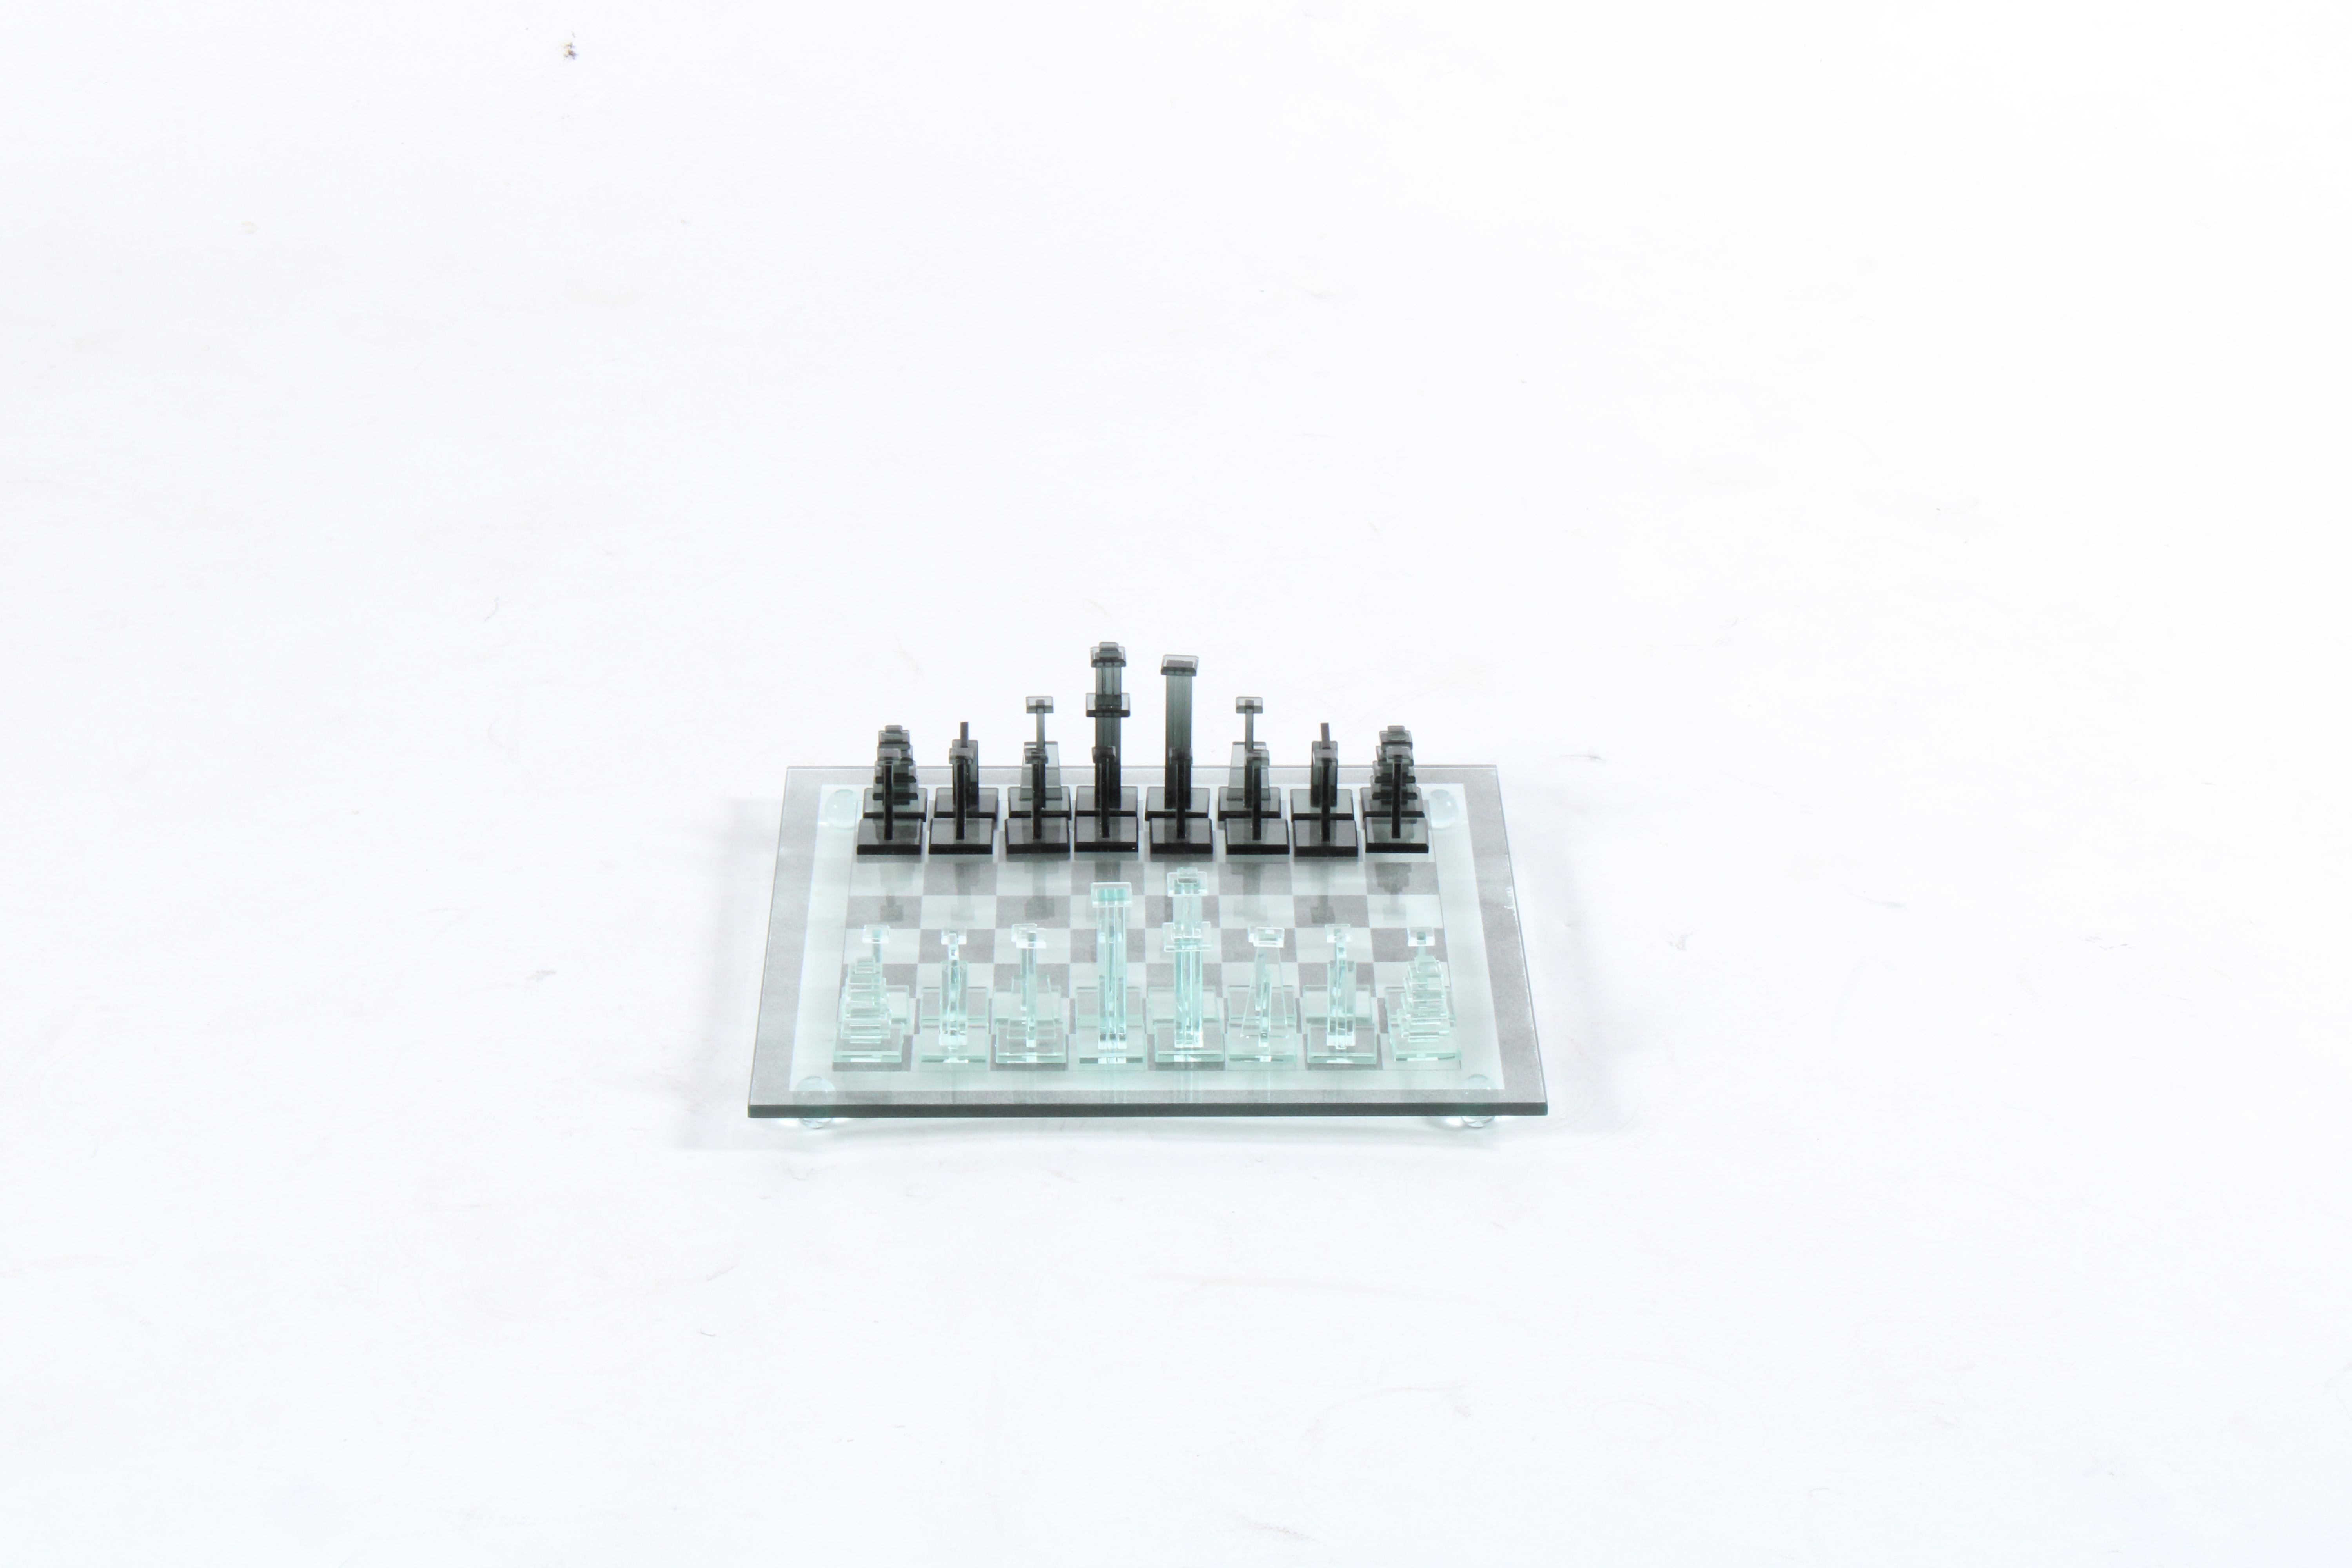 Stunning artisan handmade chess set complete with timber storage box and handwritten provenance by the maker.
Italian circa 1970 this piece comes in a specially crafted timber storage box. A unique piece that will act as superb table decor in any